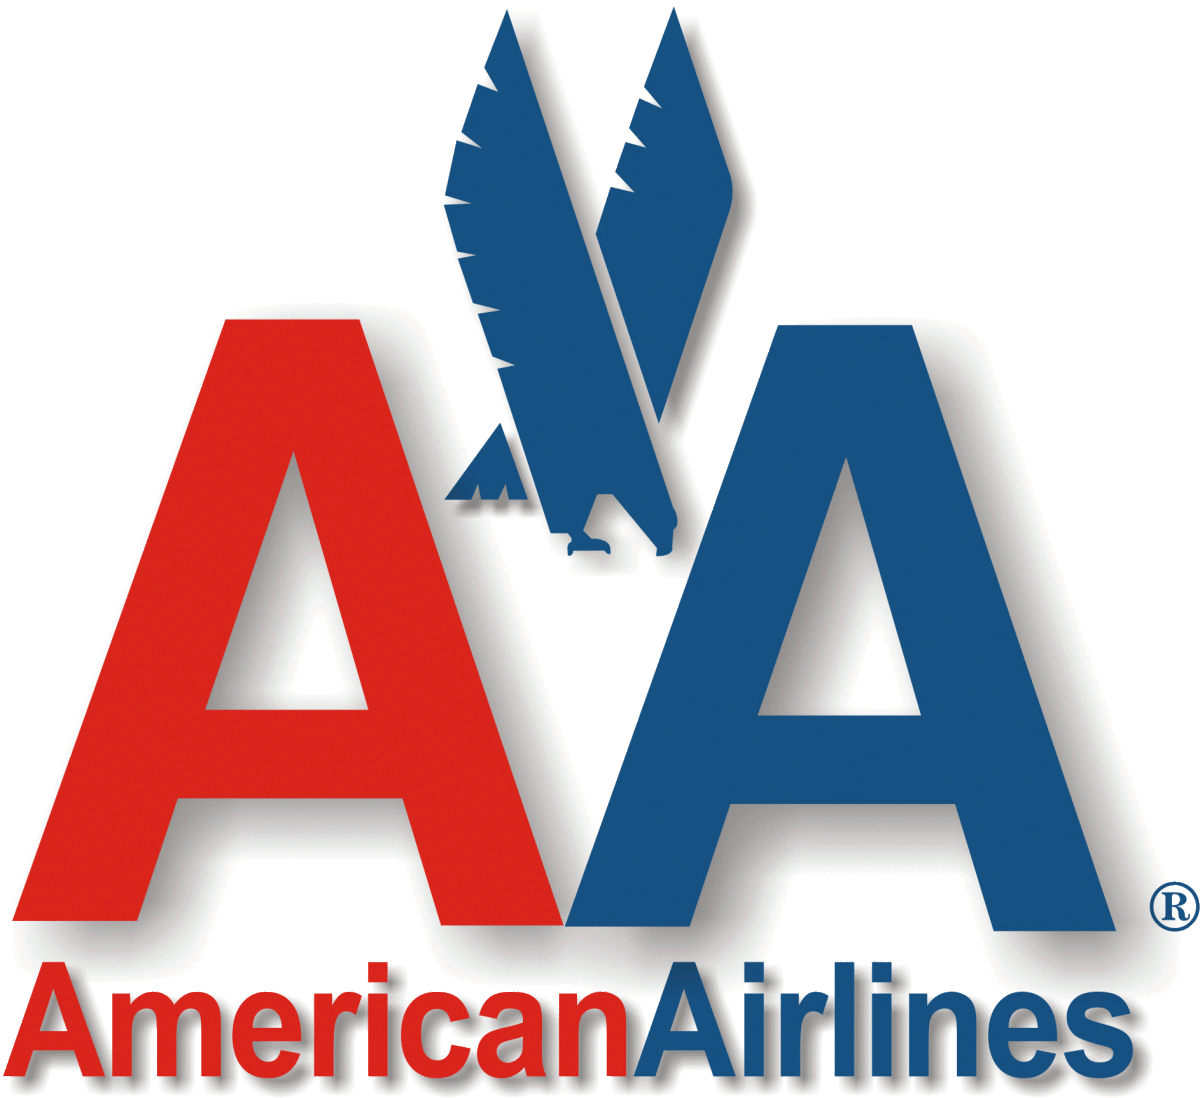 Red Triangle Airline Logo - Can I fly with SmartScoot mobility Scooter on American Airlines?